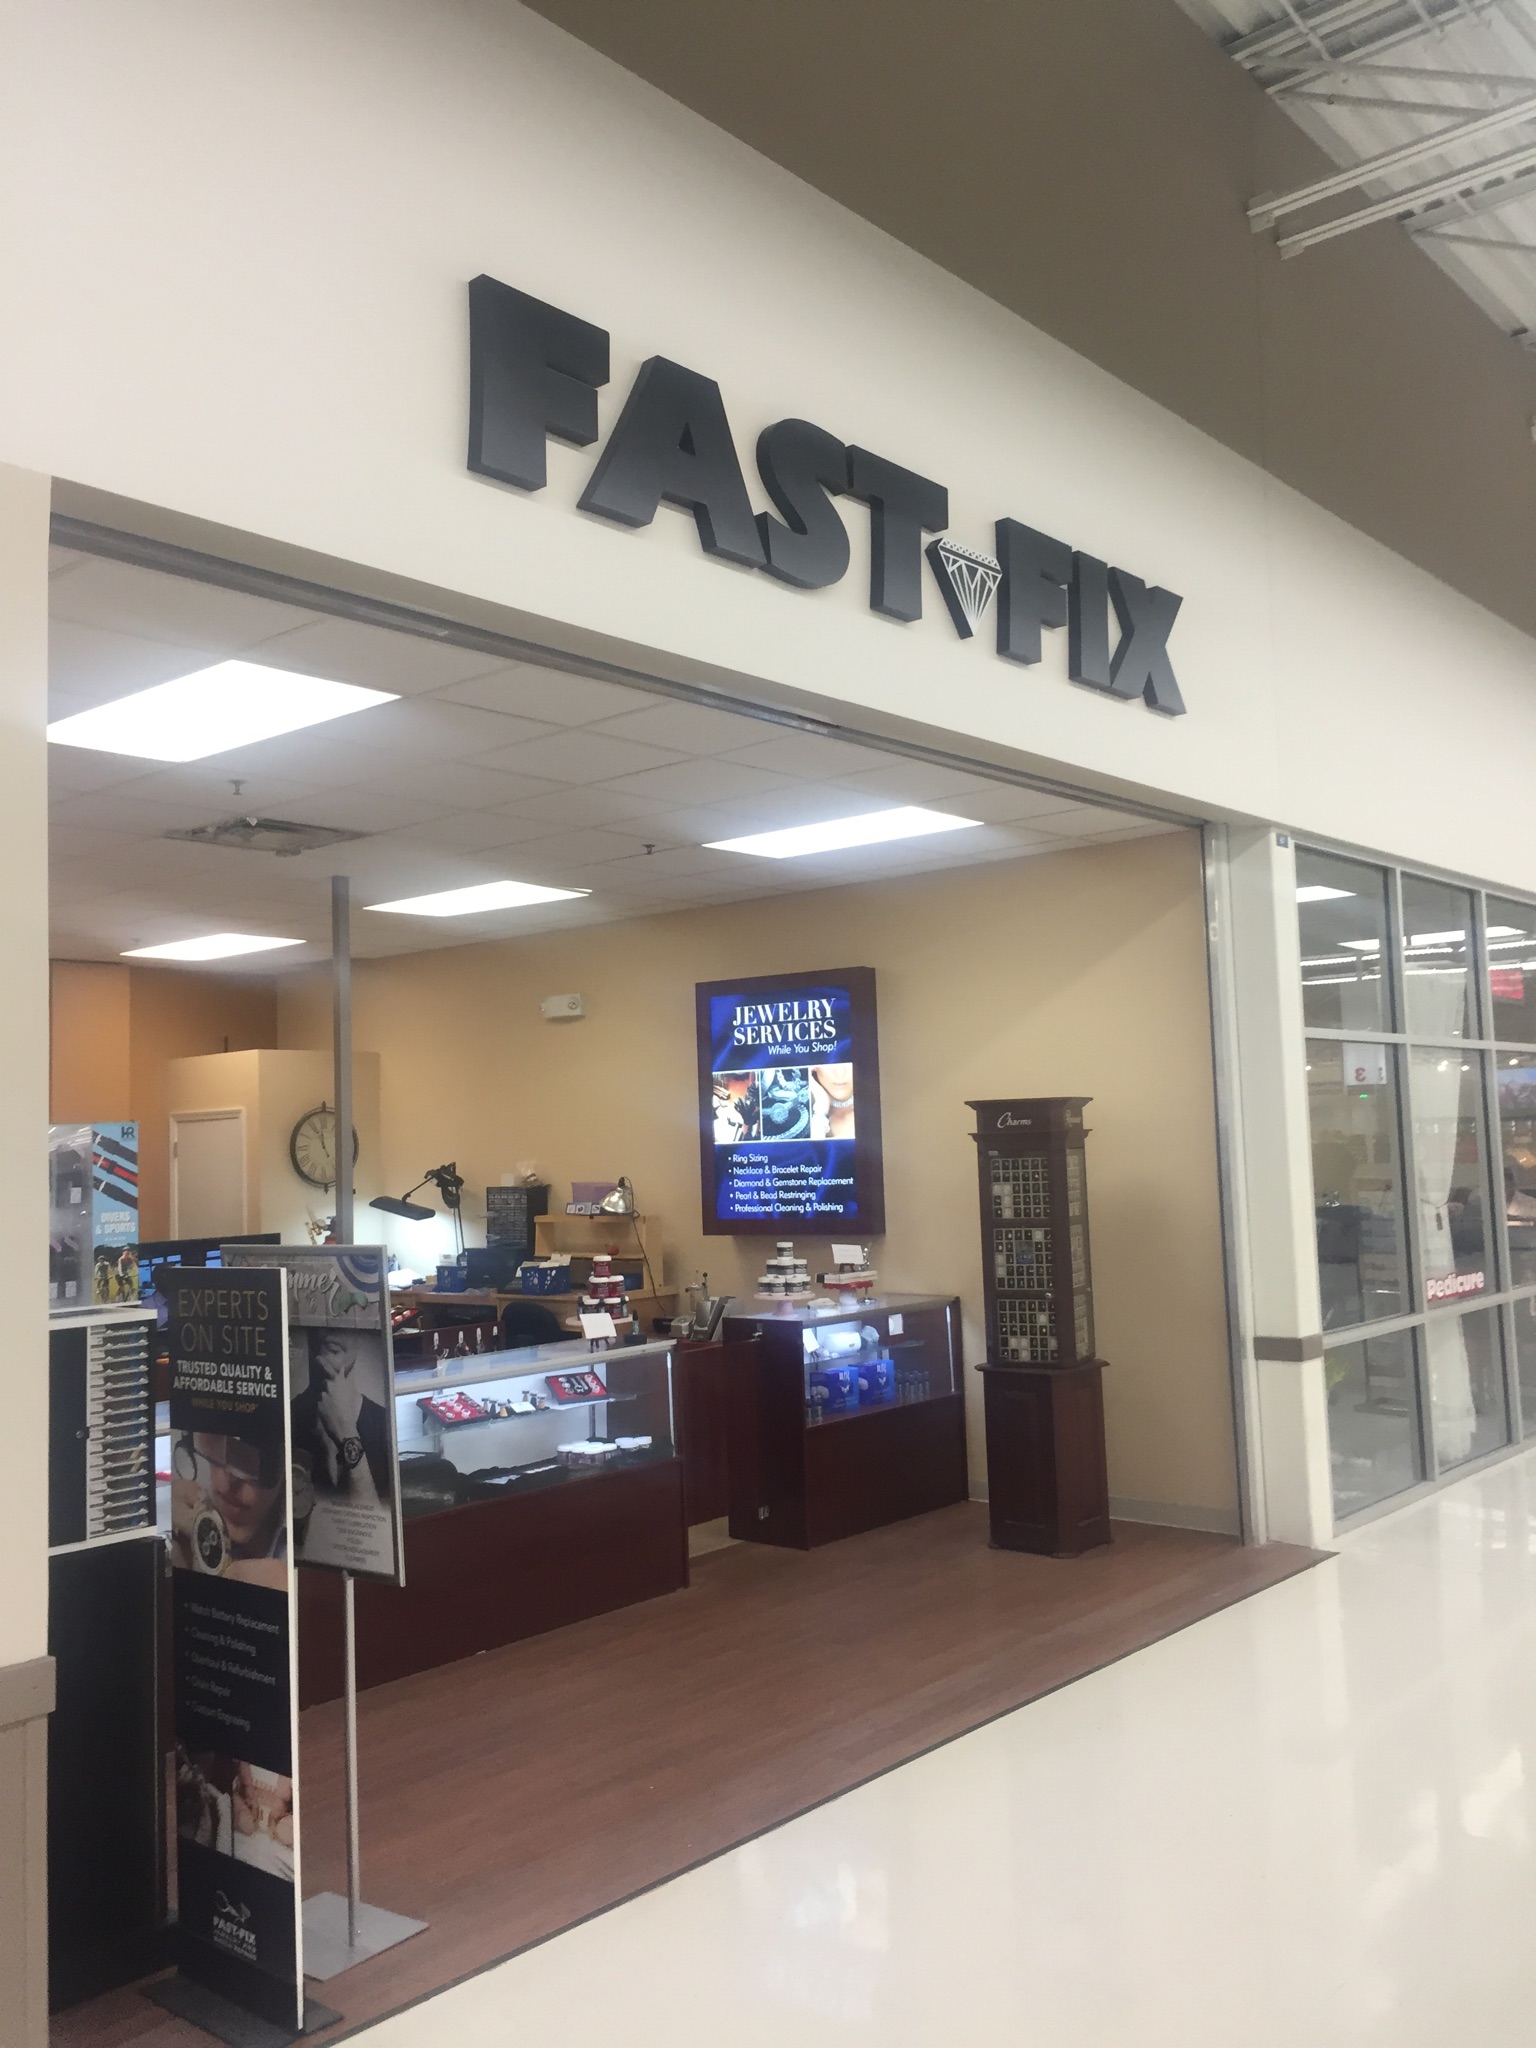 Store front of a Fast Fix franchise